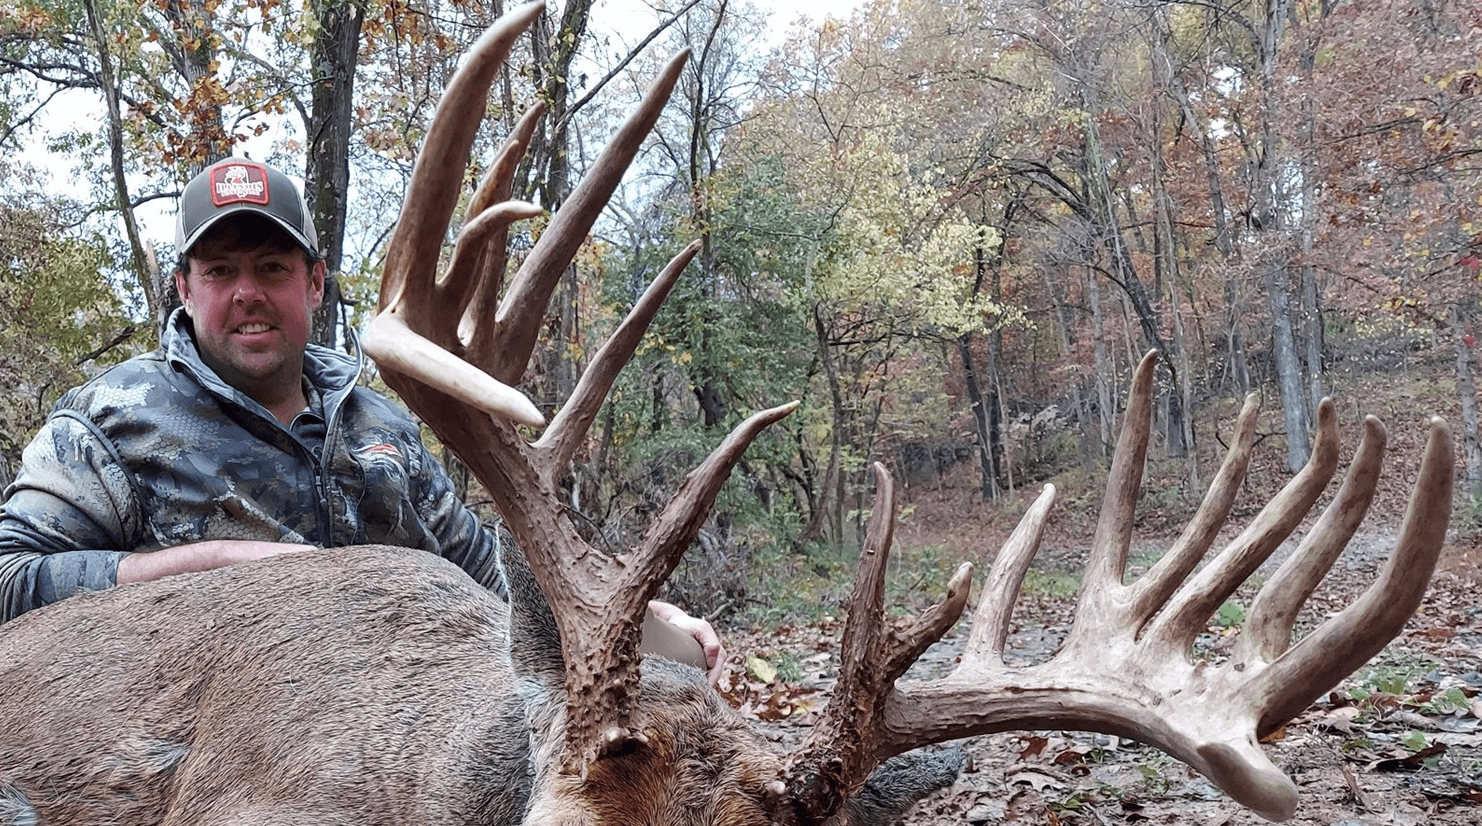 The 230-Inch Illinois Giant